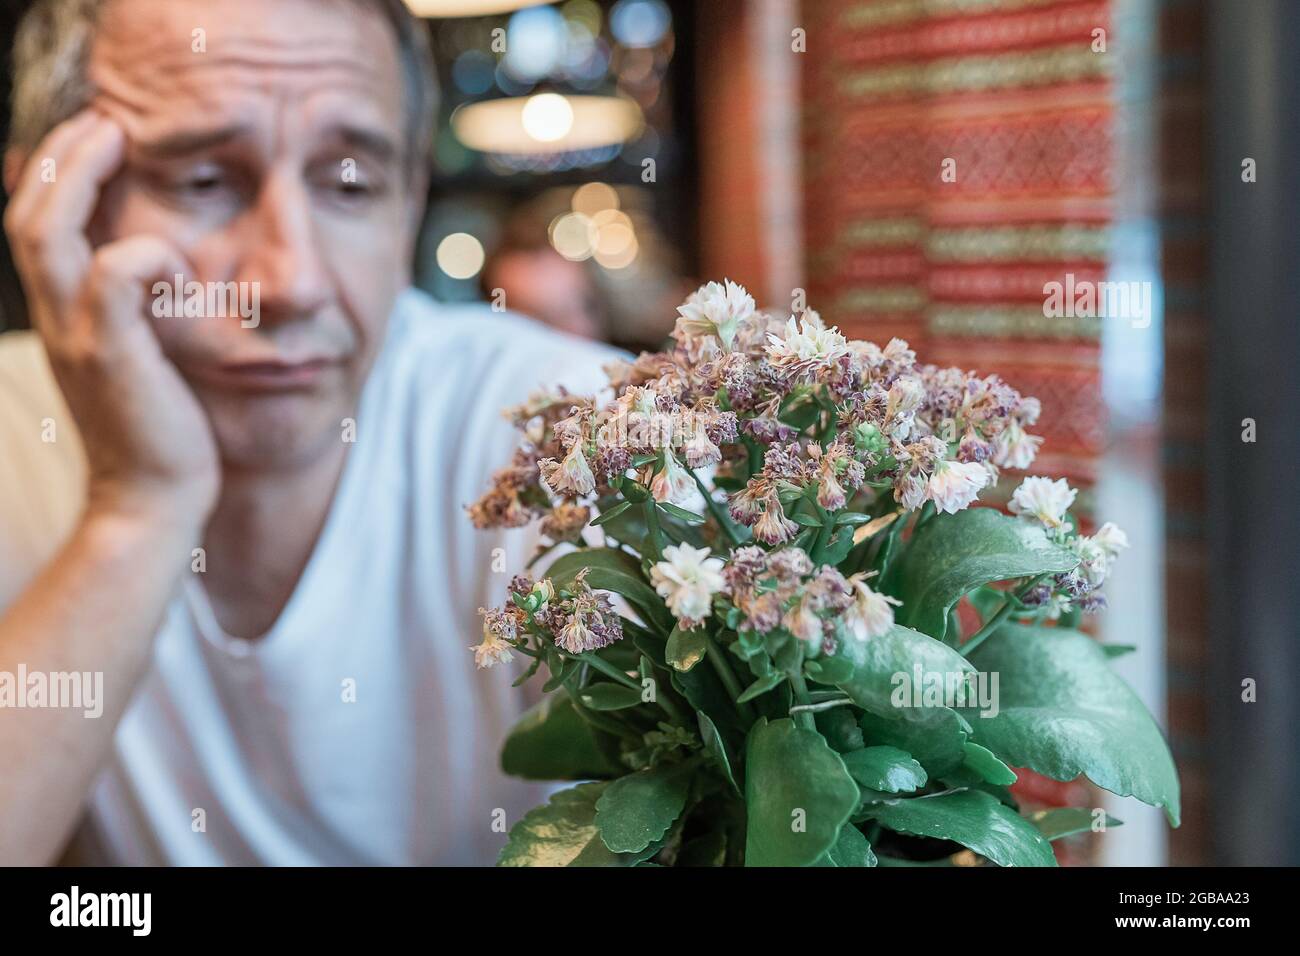 man in depressed state with sad emotions on his face while waiting in restaurant with a withered flower in flowerpot Stock Photo